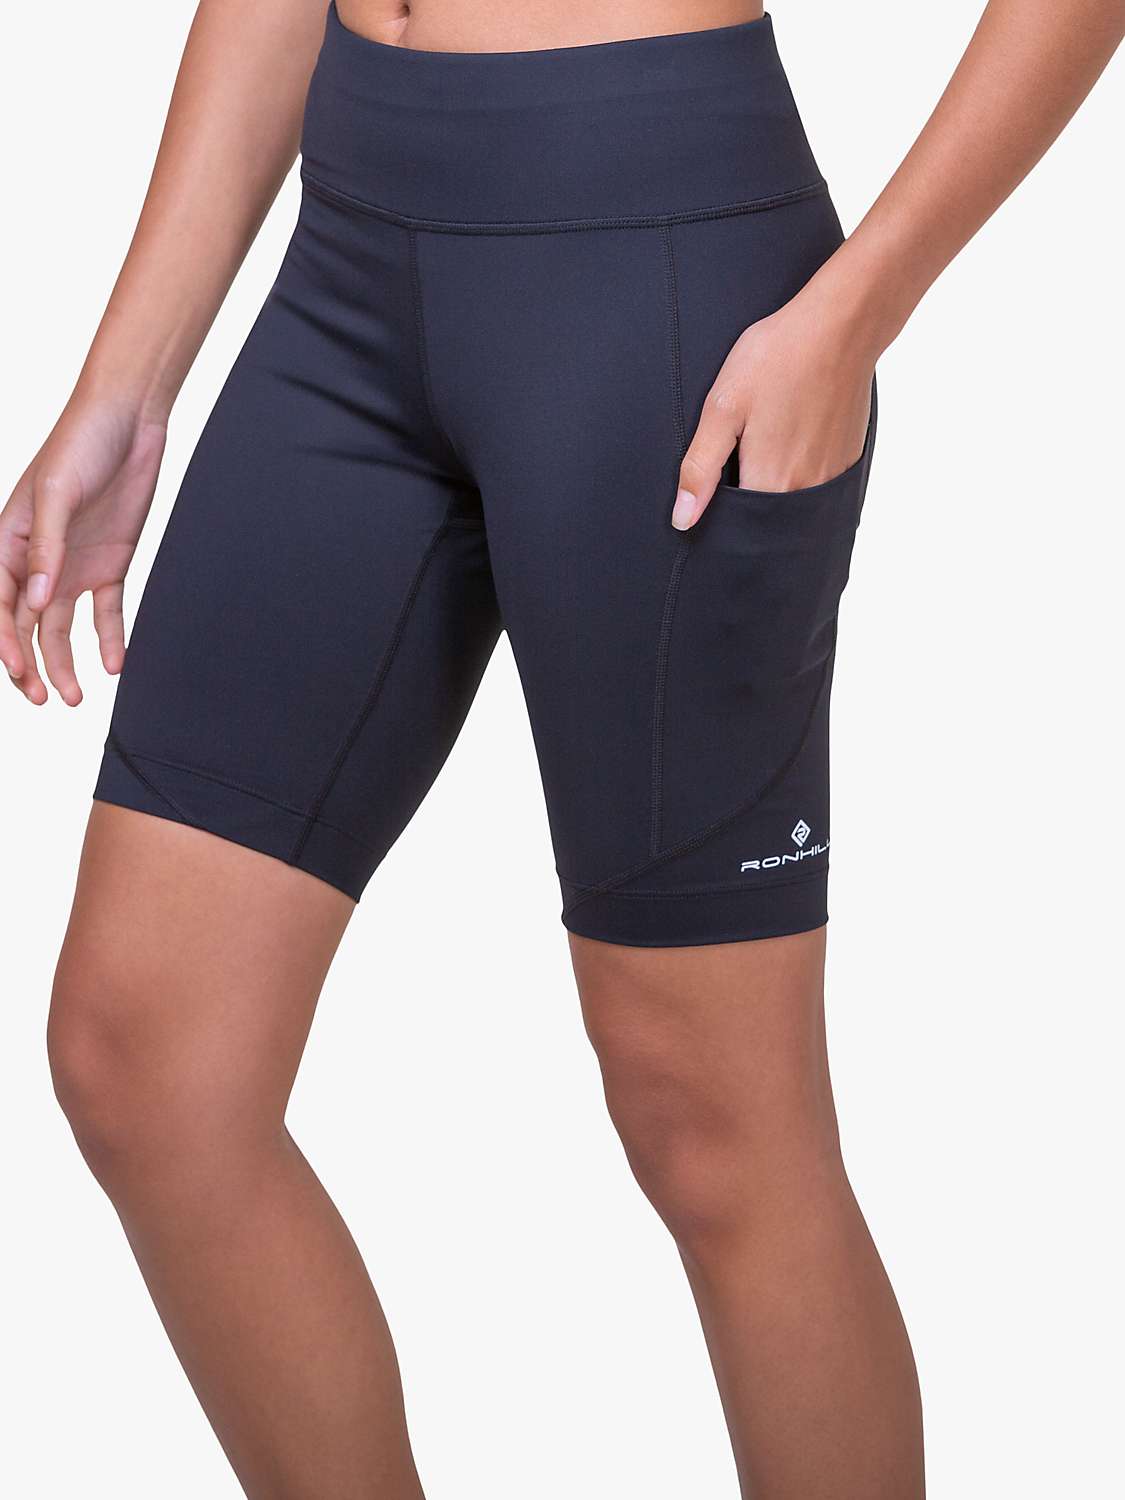 Buy Ronhill Stretch Breathable Sports Shorts, Black Online at johnlewis.com